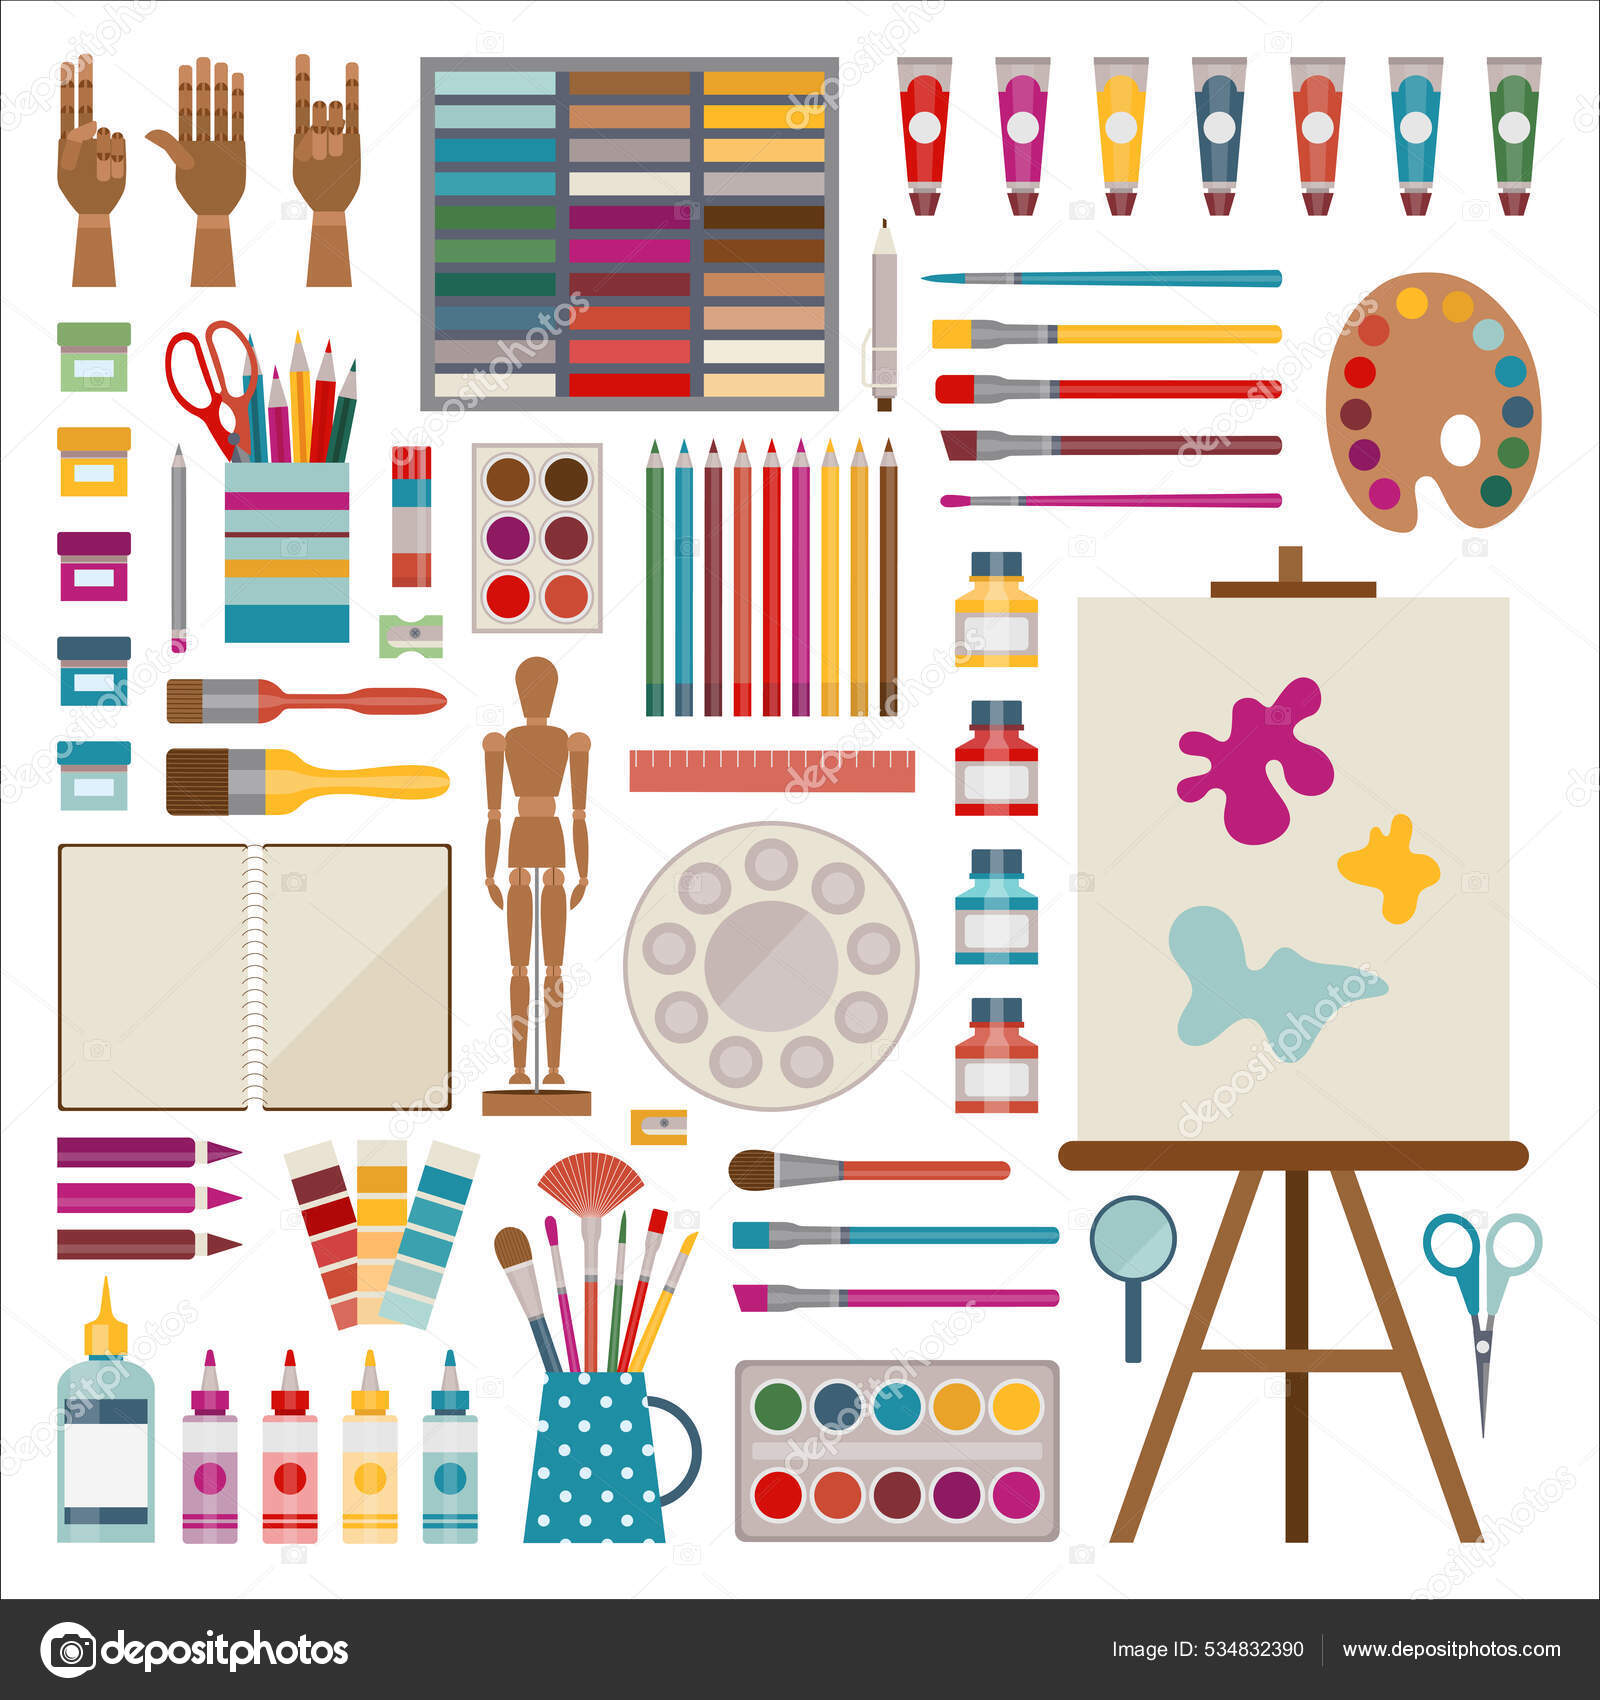 Painting materials and tools for artists Vector Image